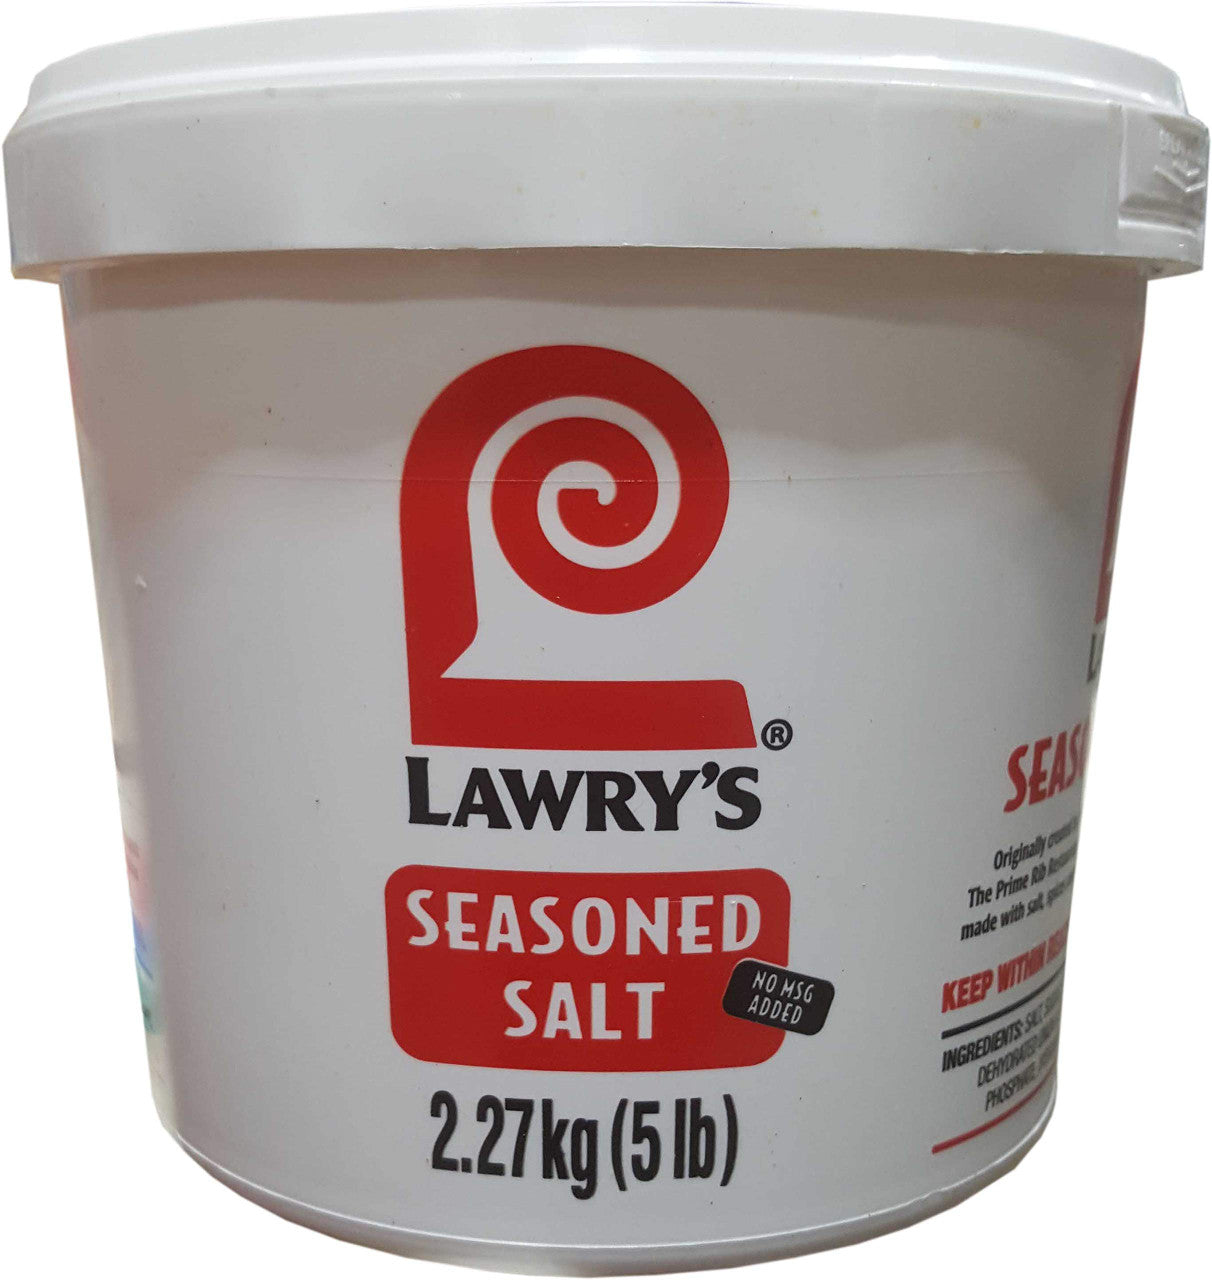 Lawry's Seasoned Salt, No MSG,  2.27 Kg/5lbs., {Imported from Canada}